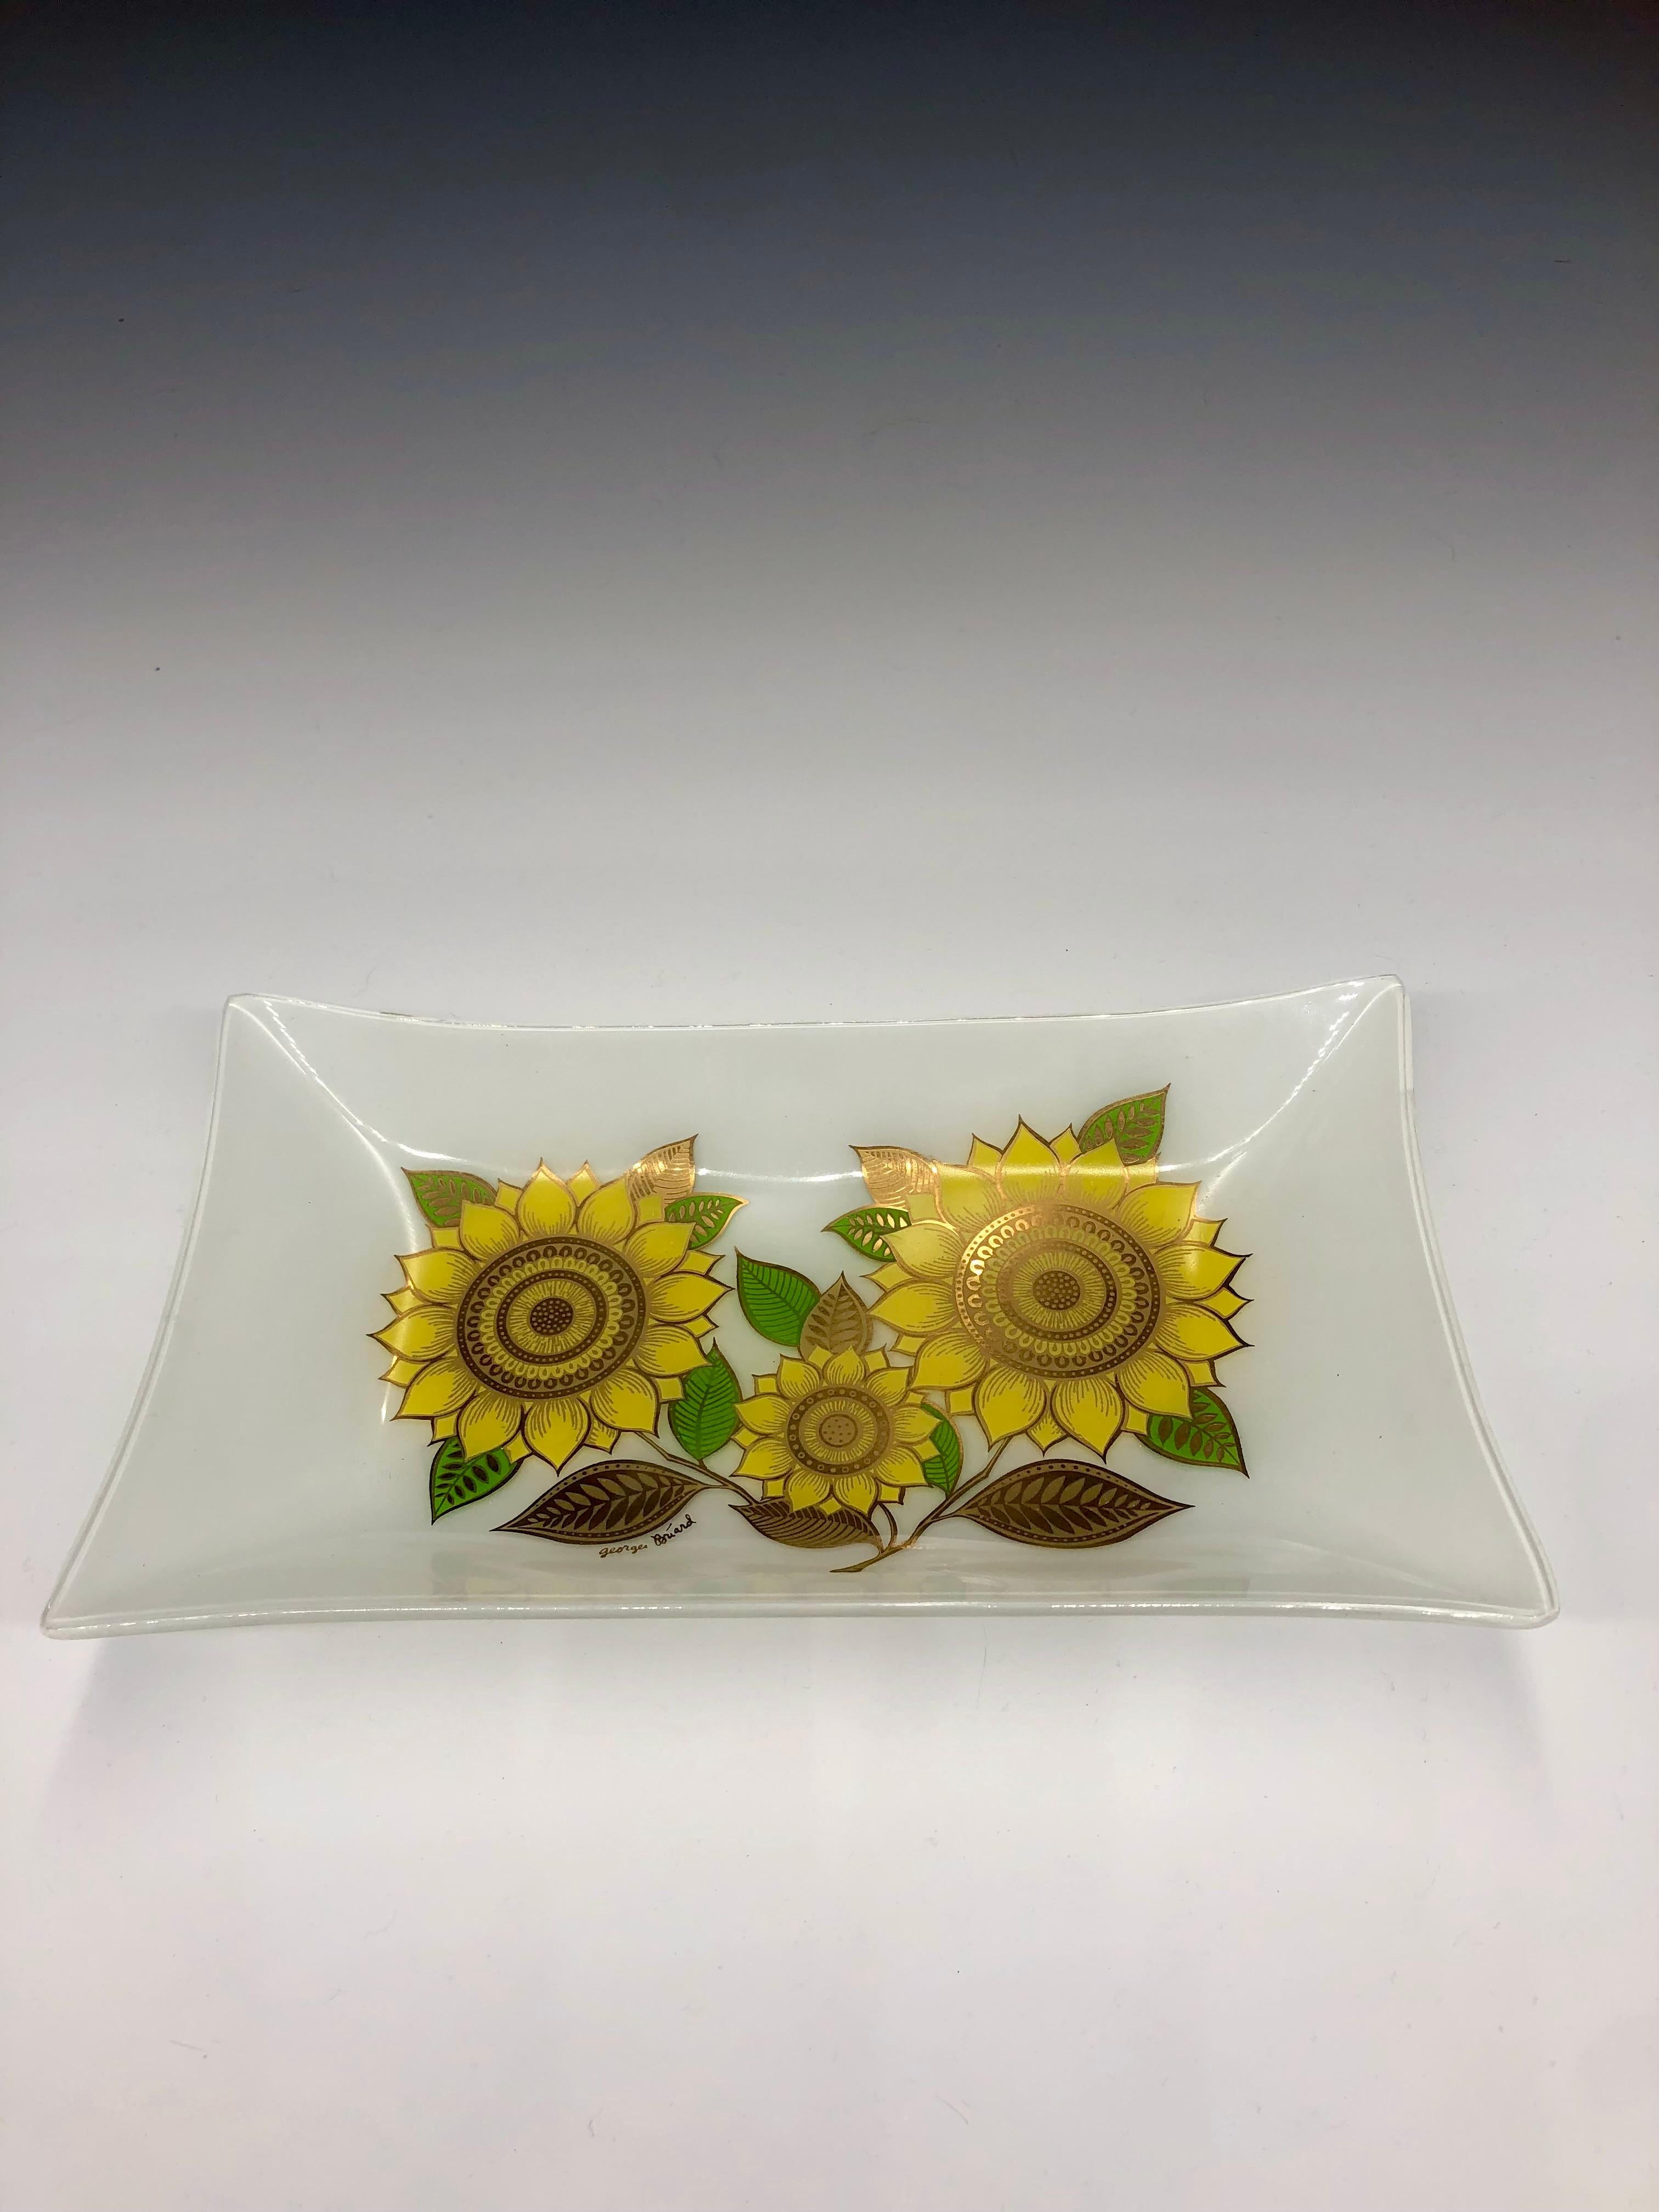 Brighten up your table top with this vintage 1960s Georges Briard glass rectangular sunflower dish / tray. Bold yellow sunflower and green leaf design with gold leaf accents against smoky white background. Signed mid lower left side. 

Georges